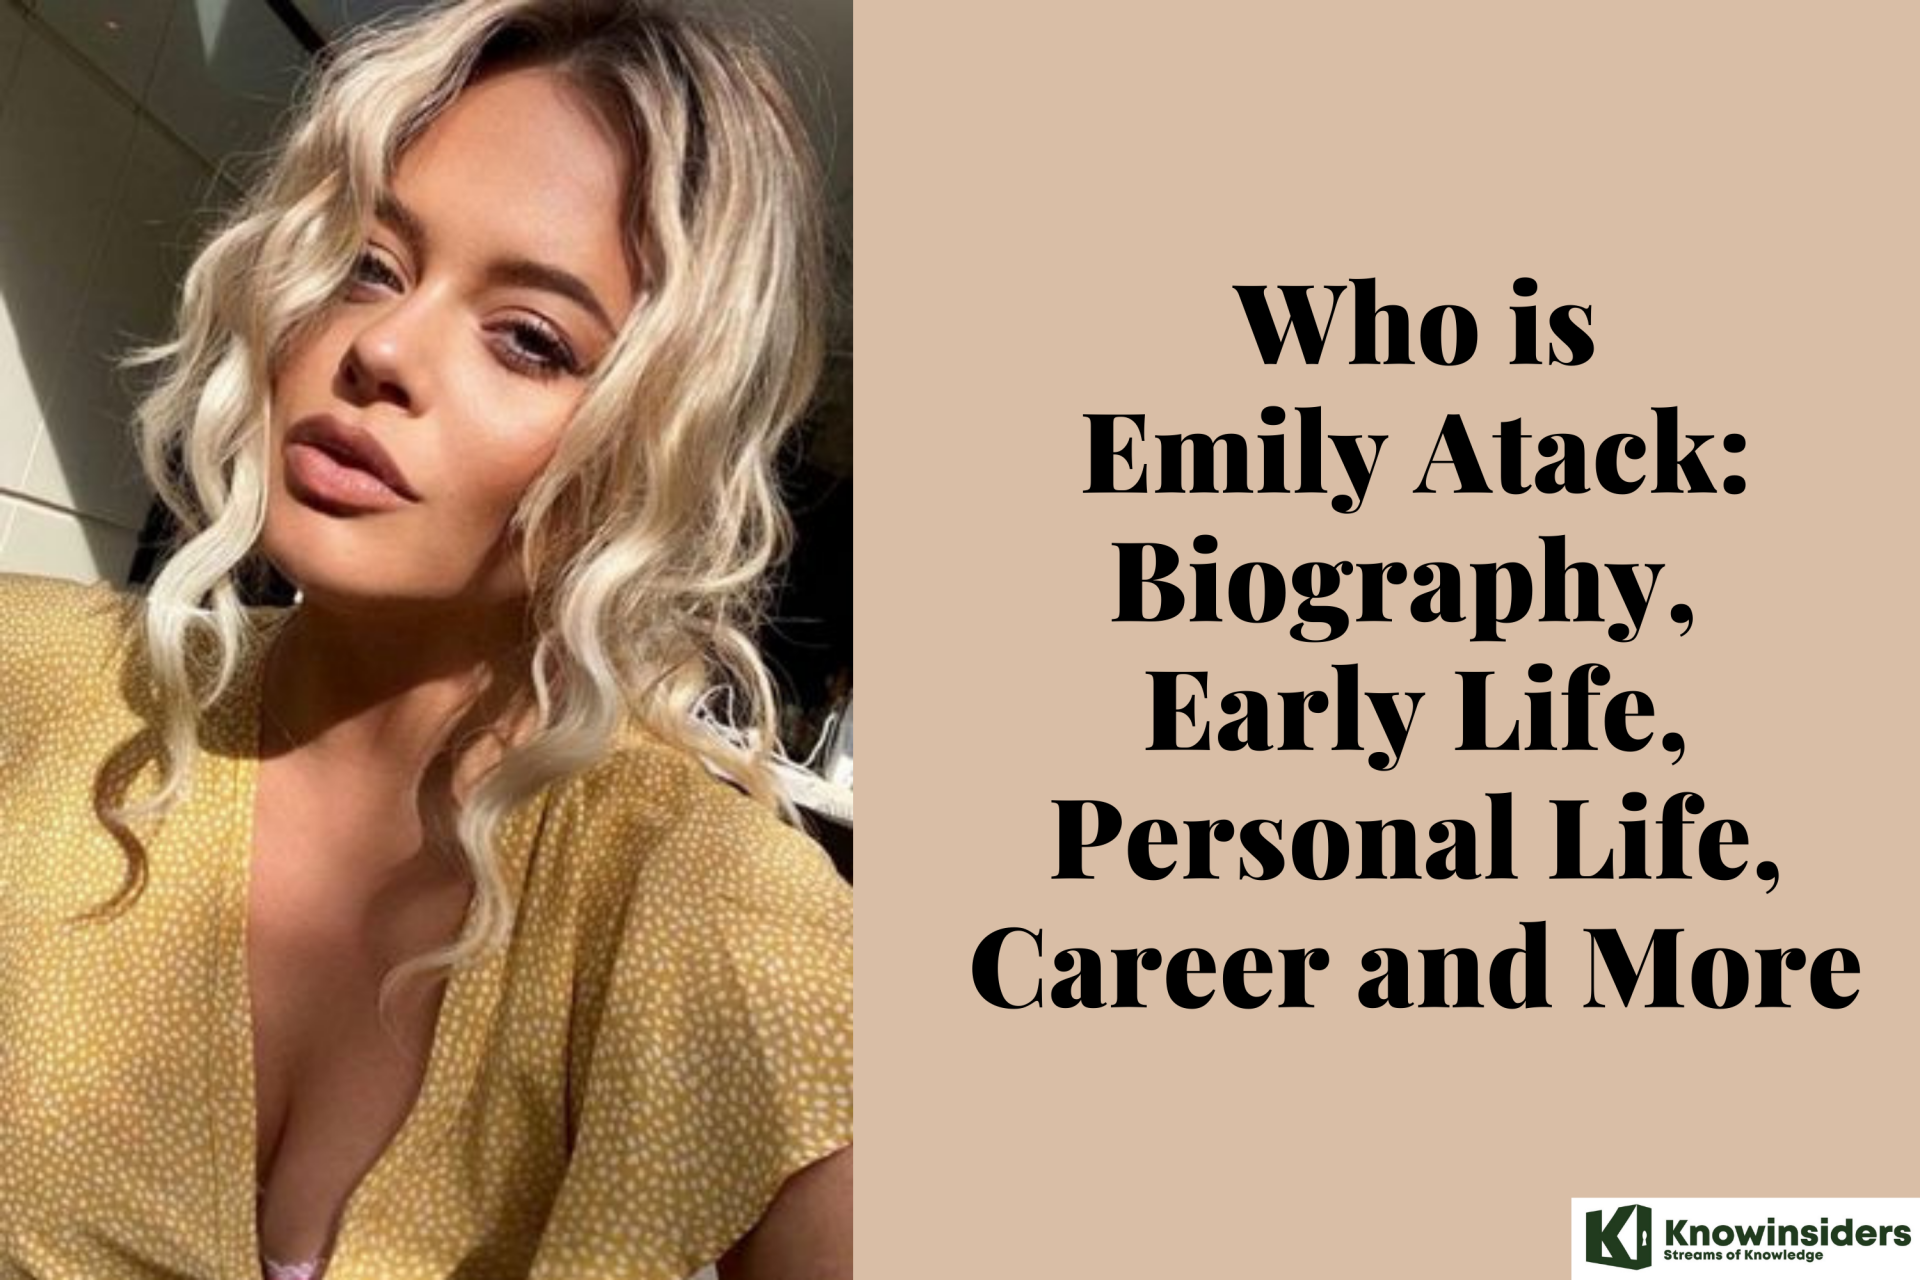 Who is Emily Atack: Biography, Early Life, Personal Life, Career and More